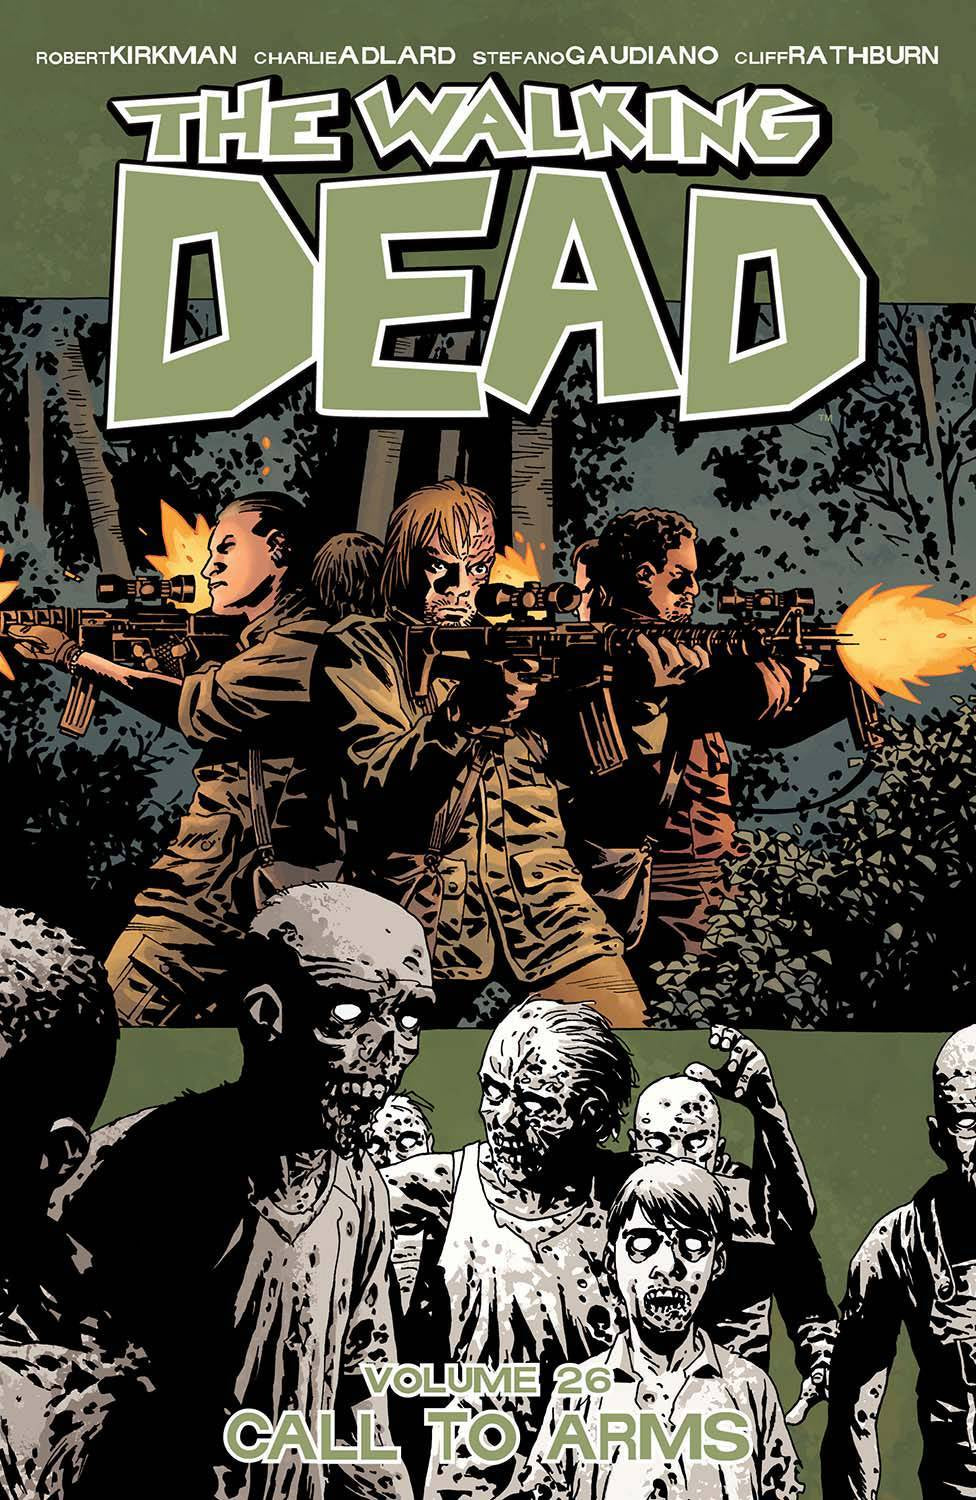 WALKING DEAD VOLUME 26 CALL TO ARMS